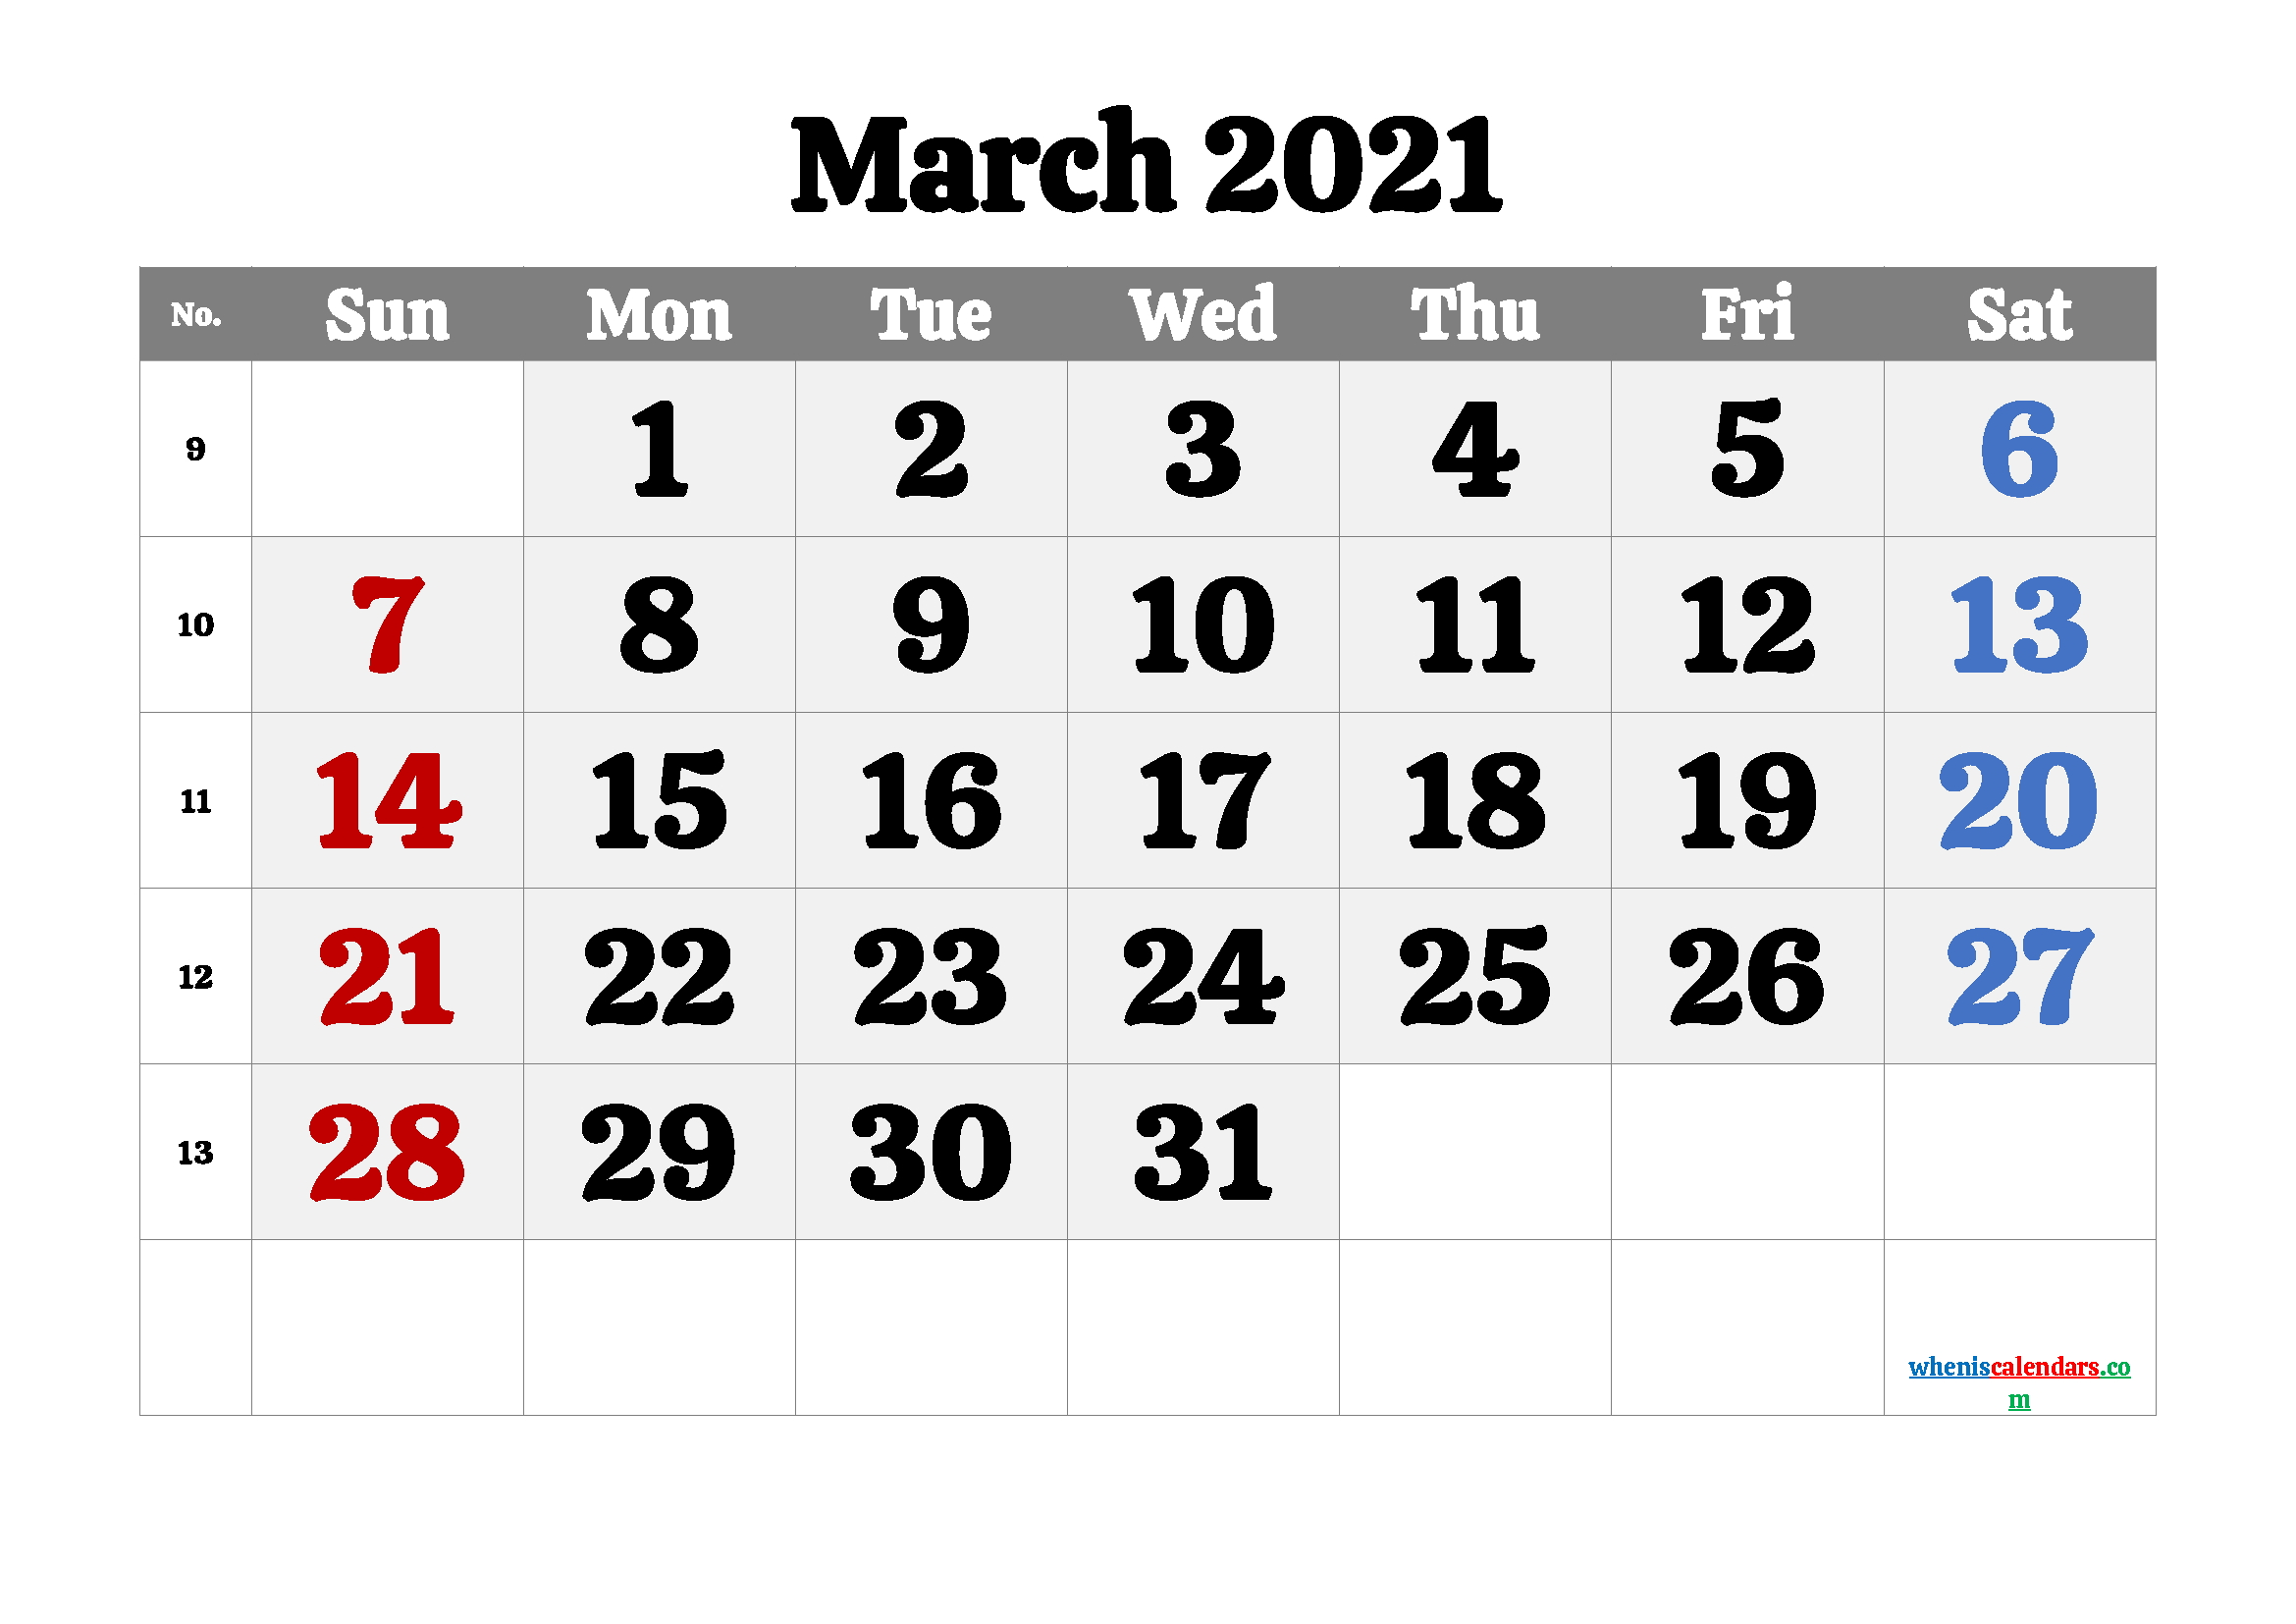 march-2023-calendar-with-lines-get-calender-2023-update